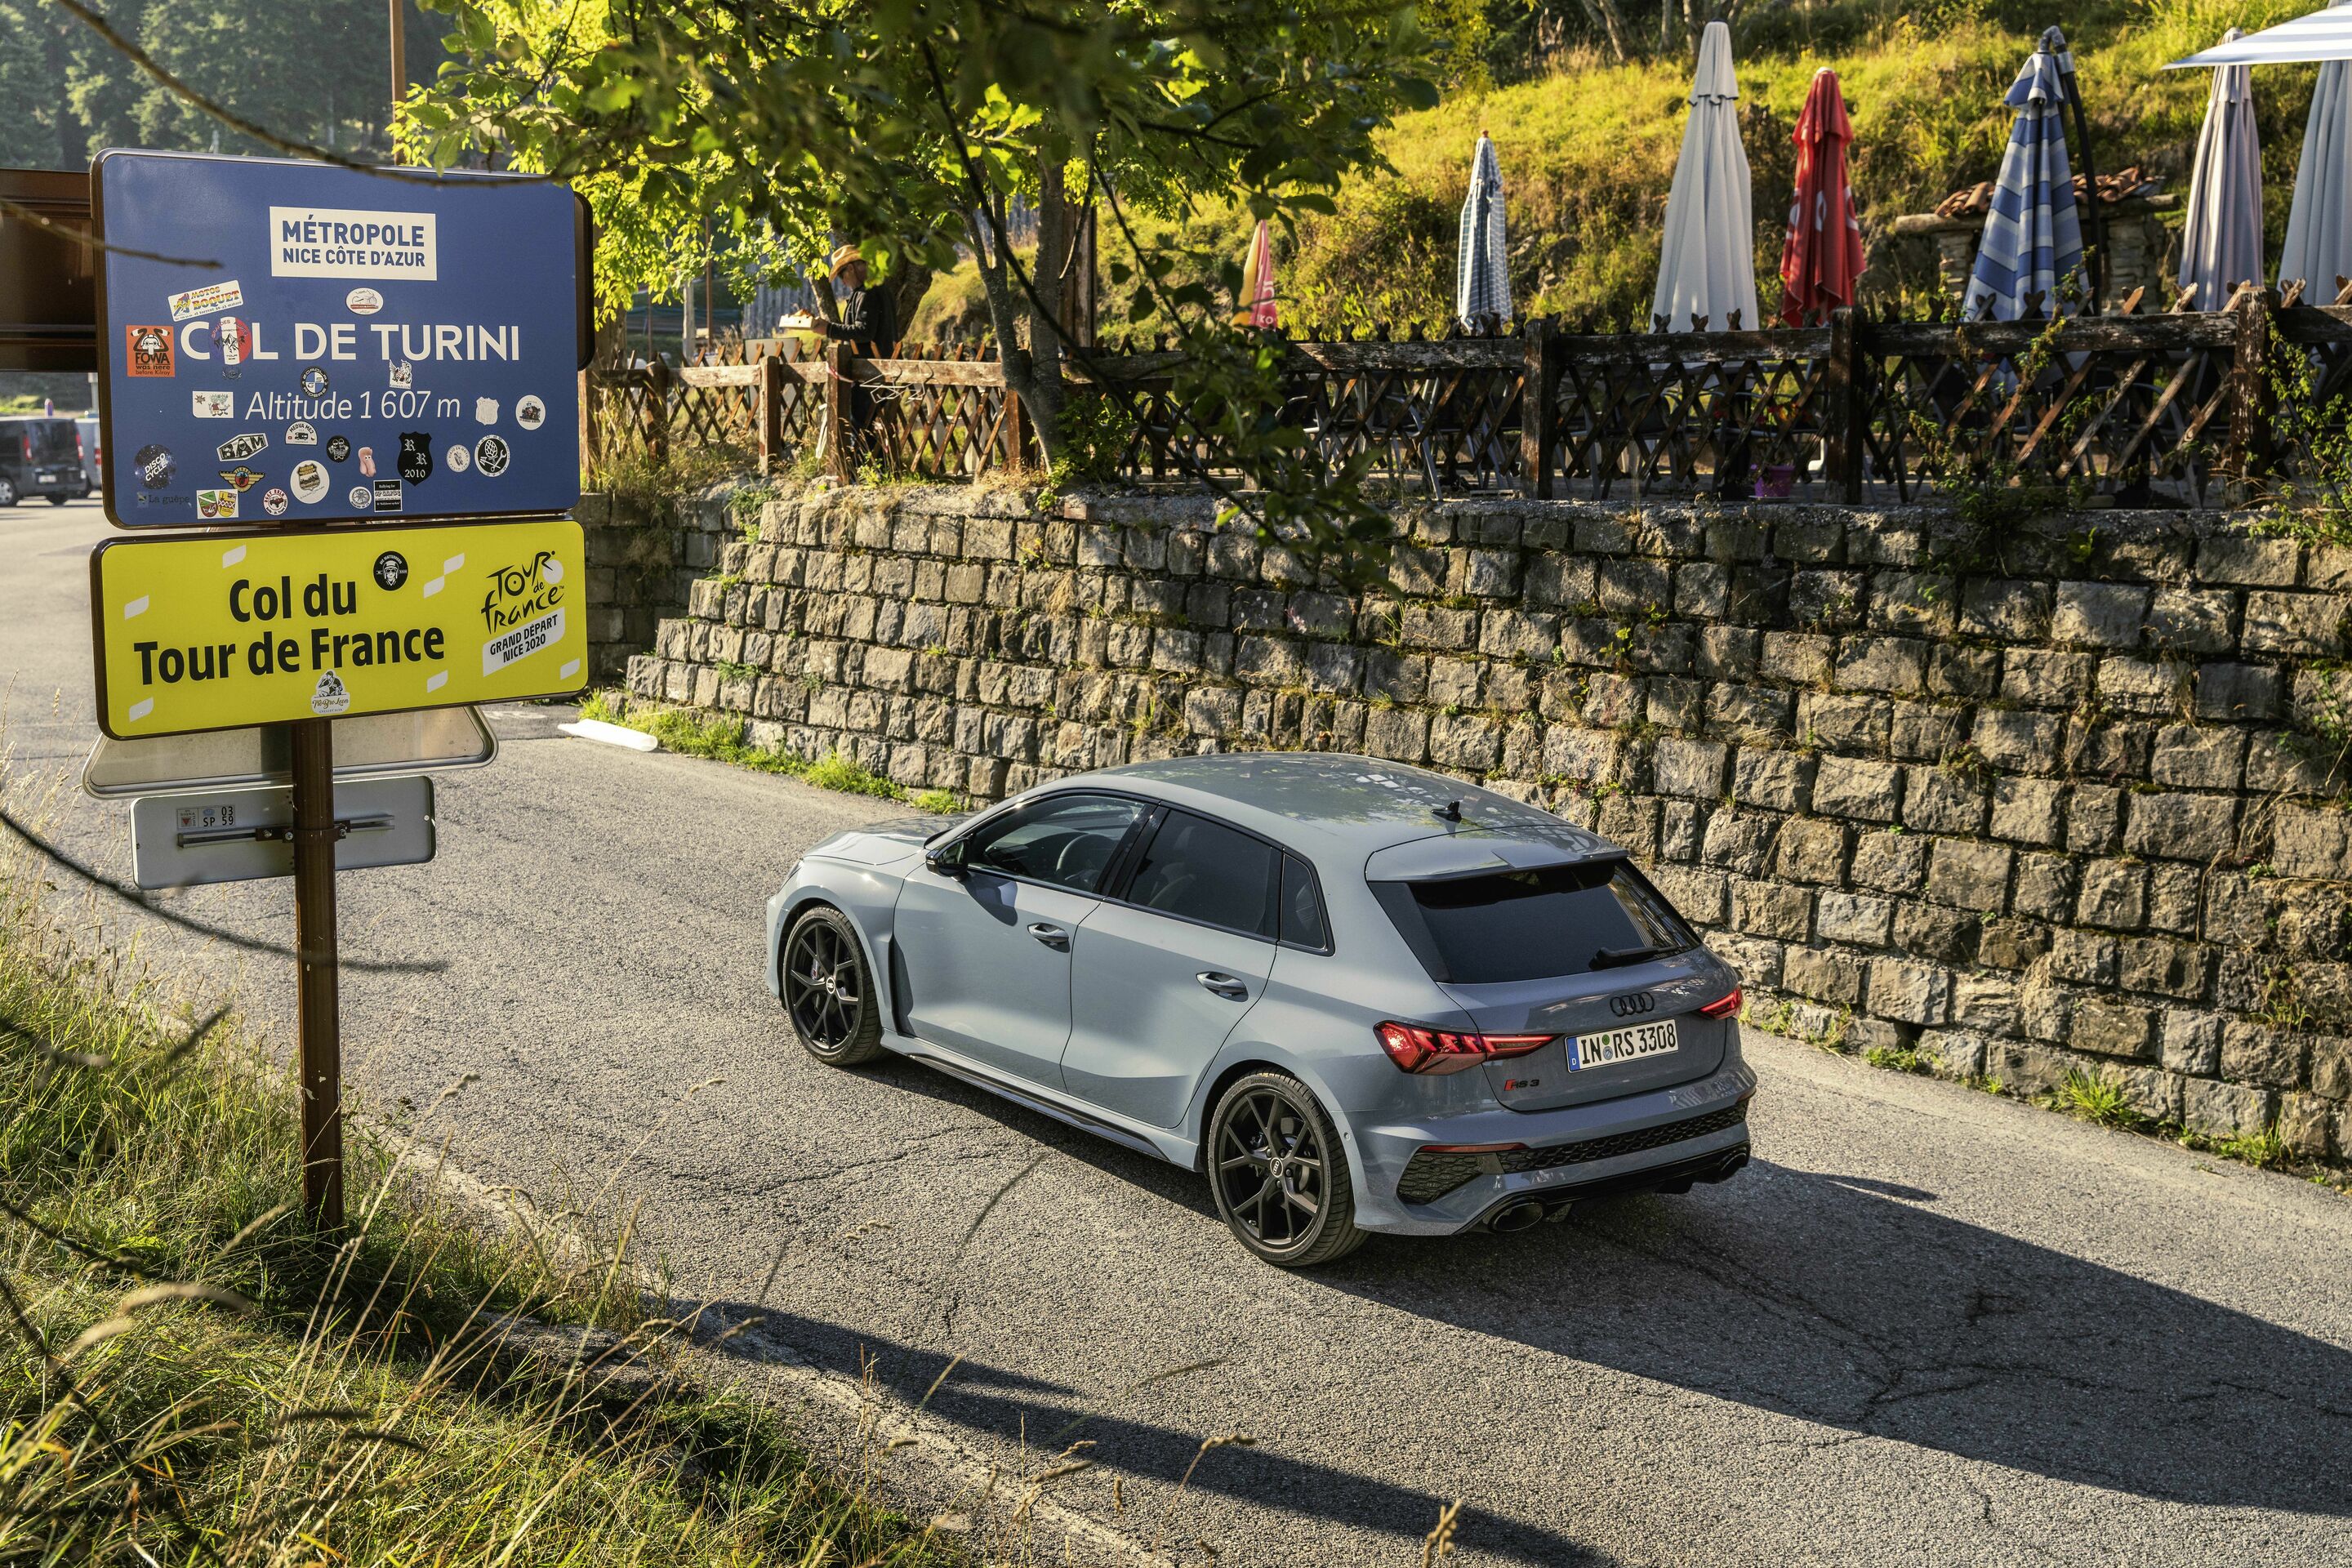 2.5 TFSI: Audi’s most powerful series five-cylinder